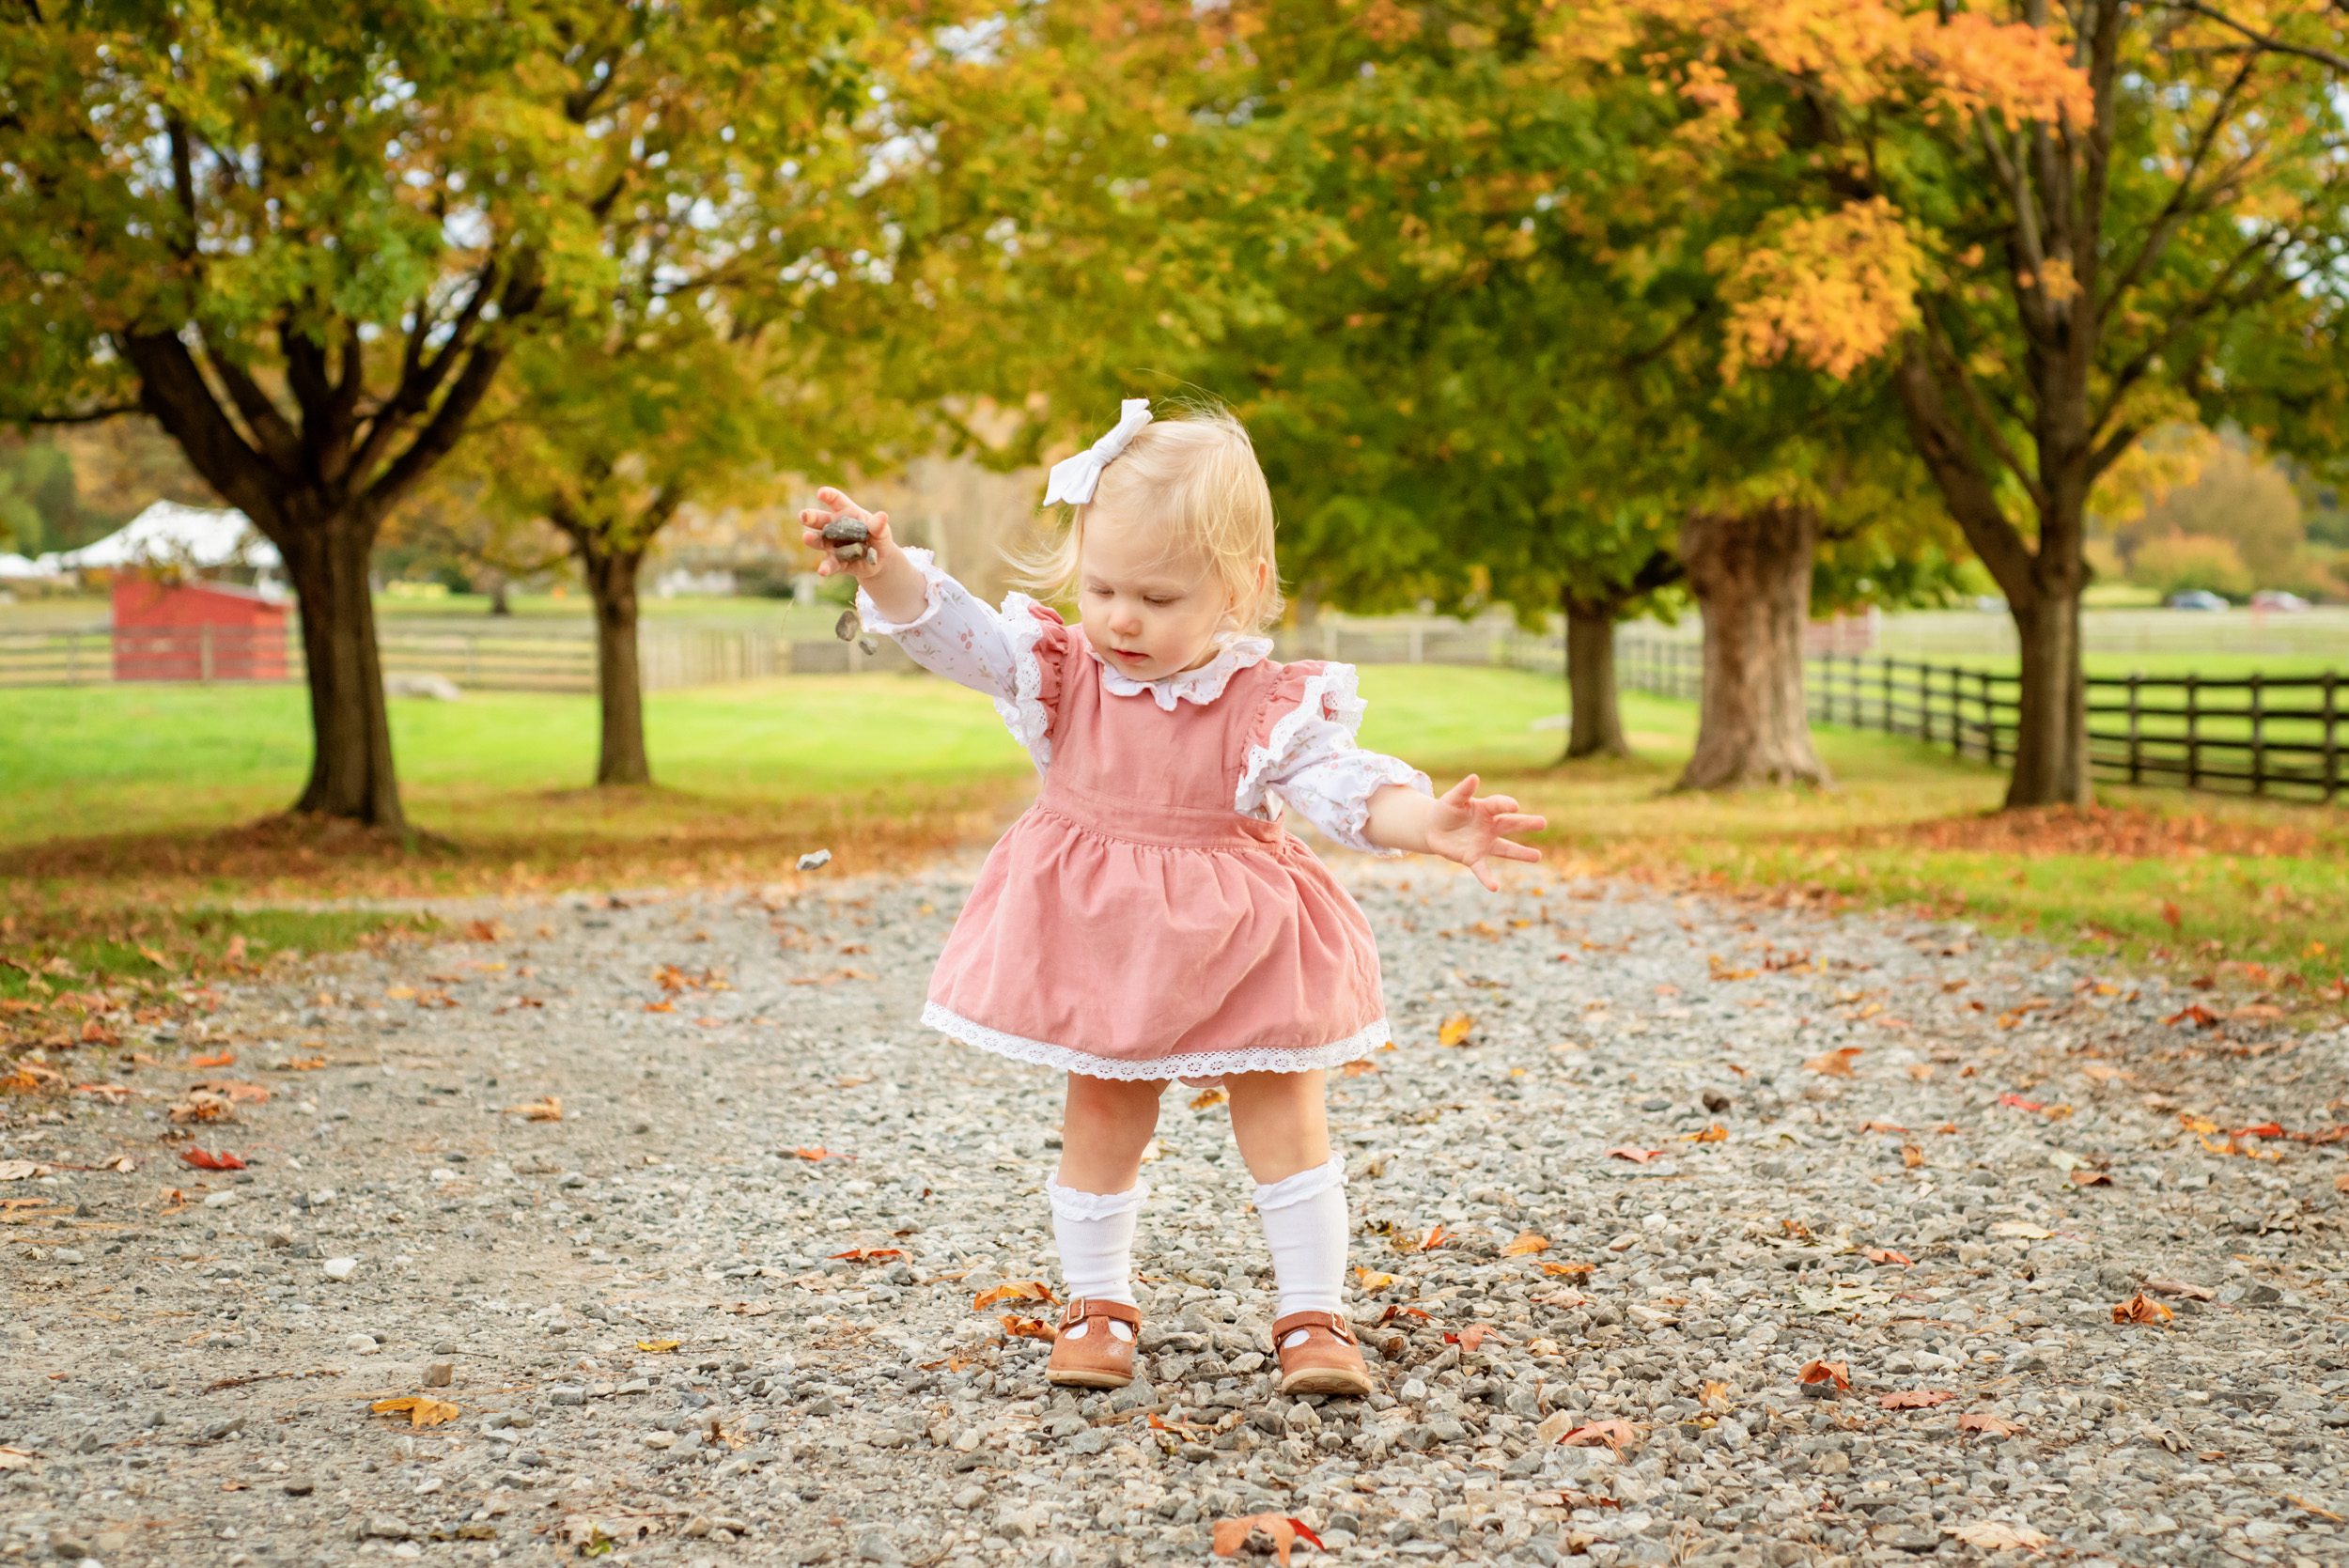 A young girl standing on a gravel tree lined path watching with fascination as the little rocks she drops fall to the ground during a family photoshoot